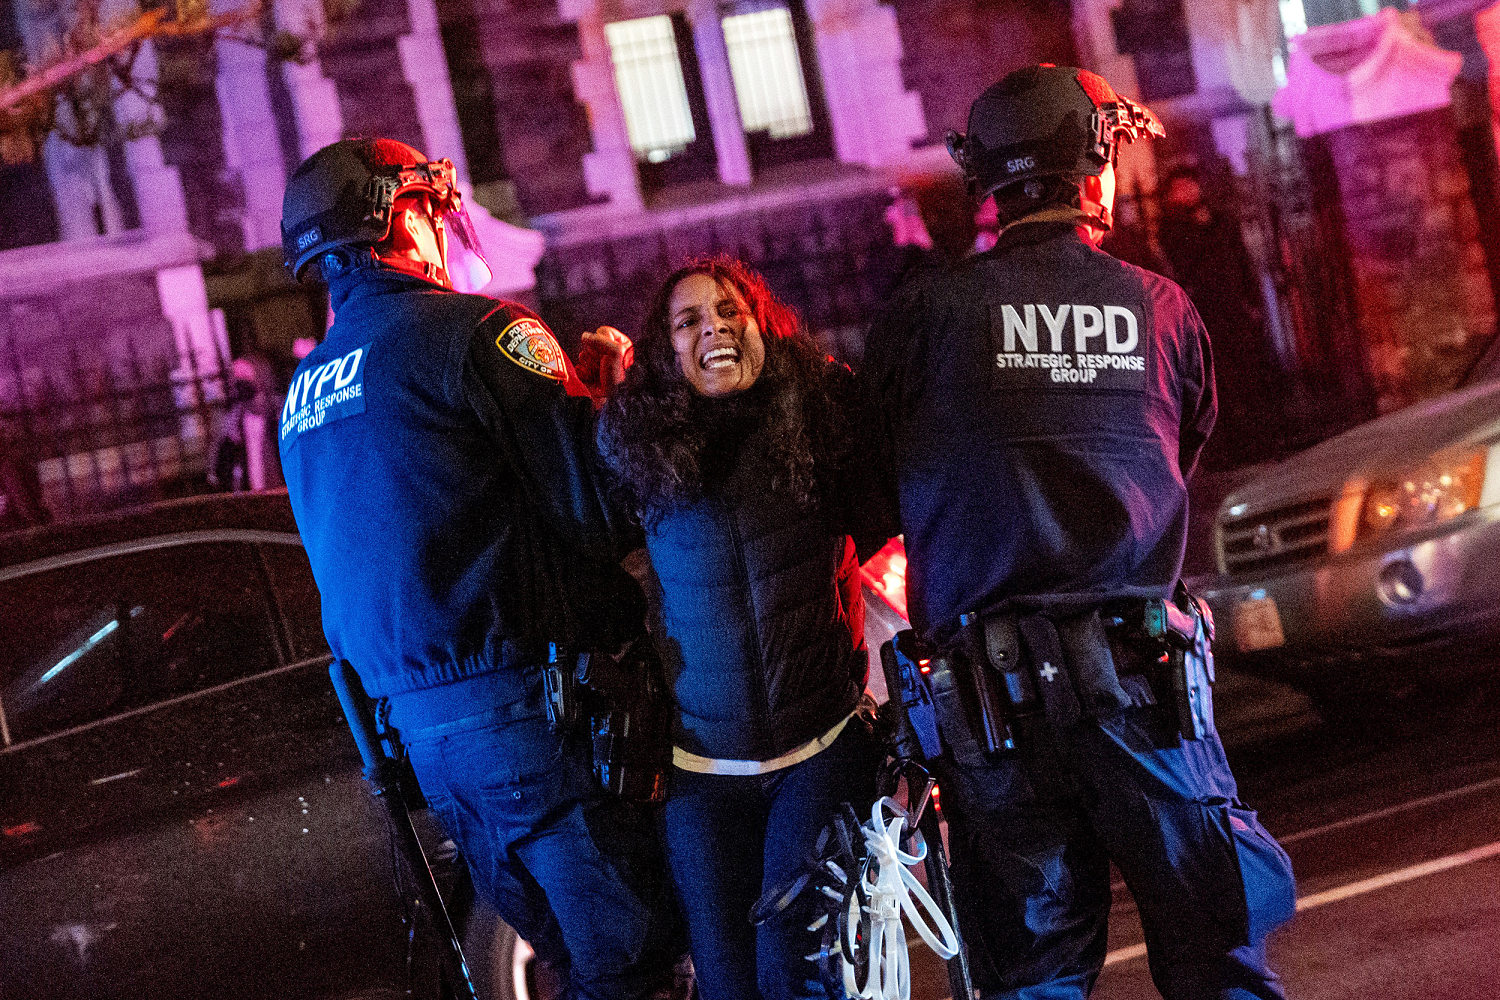 Nearly 300 arrested on N.Y. campuses; UCLA cancels all classes after violent clashes